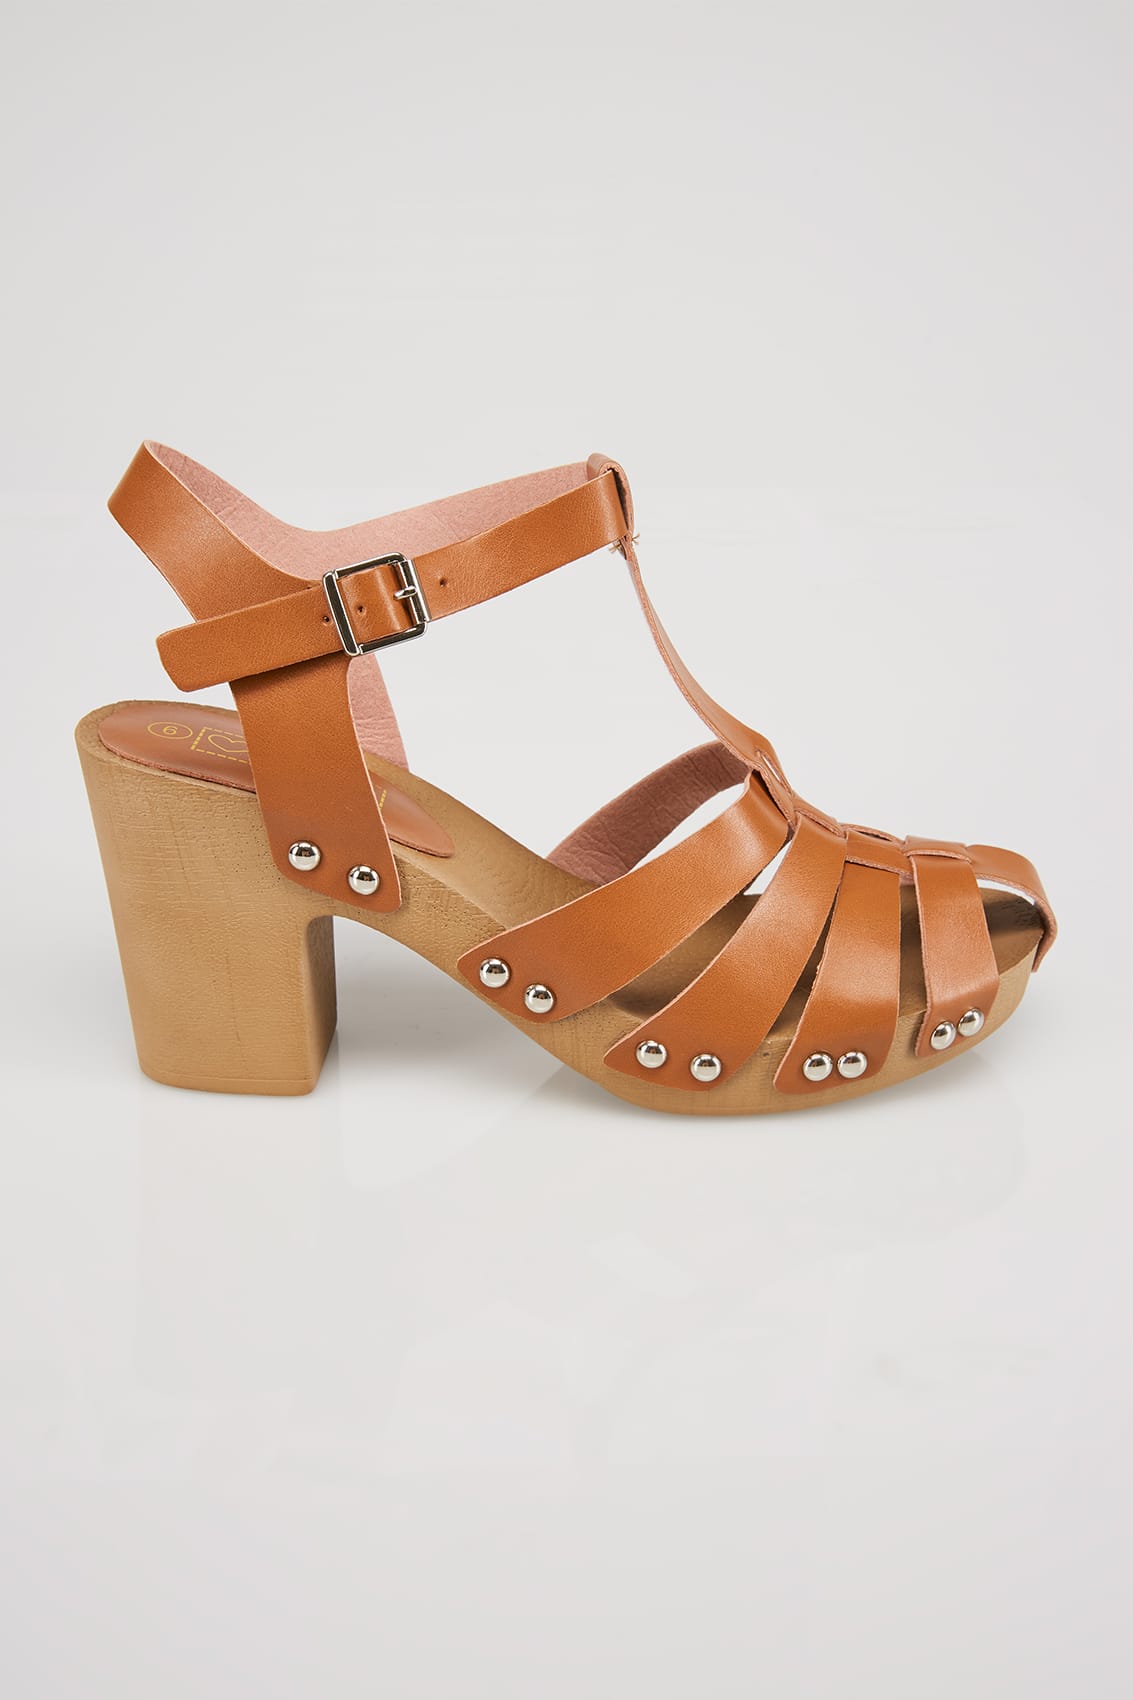 Tan Strap Block Heel Sandal With Wooden Effect Sole In E Fit Size 4,5,6 ...